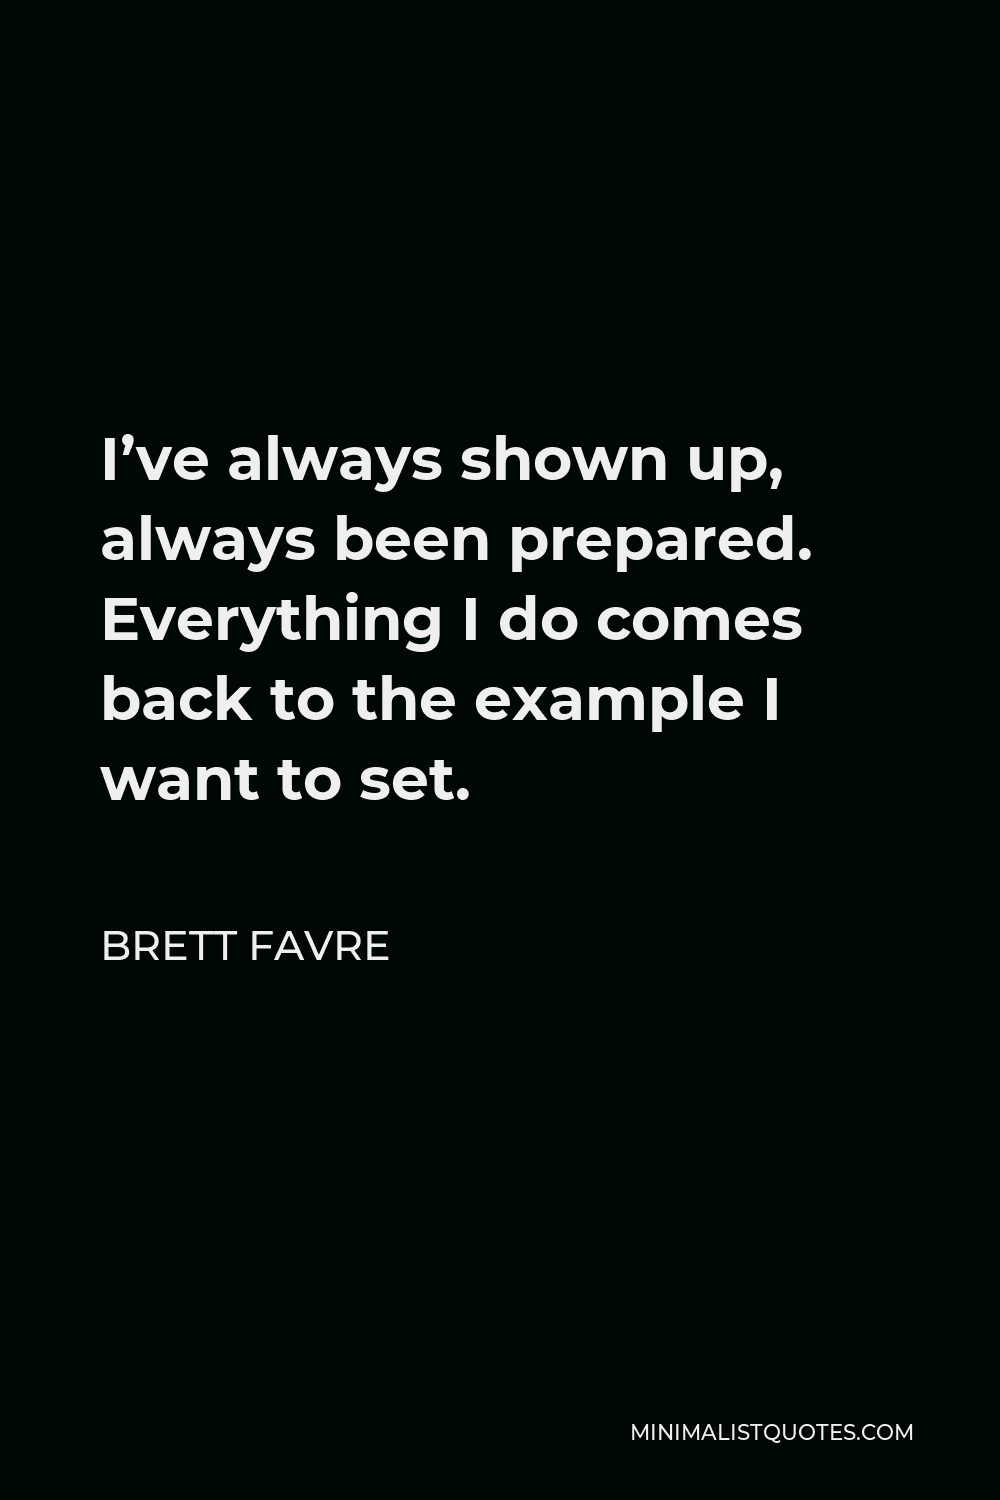 Brett Favre Quote - I’ve always shown up, always been prepared. Everything I do comes back to the example I want to set.